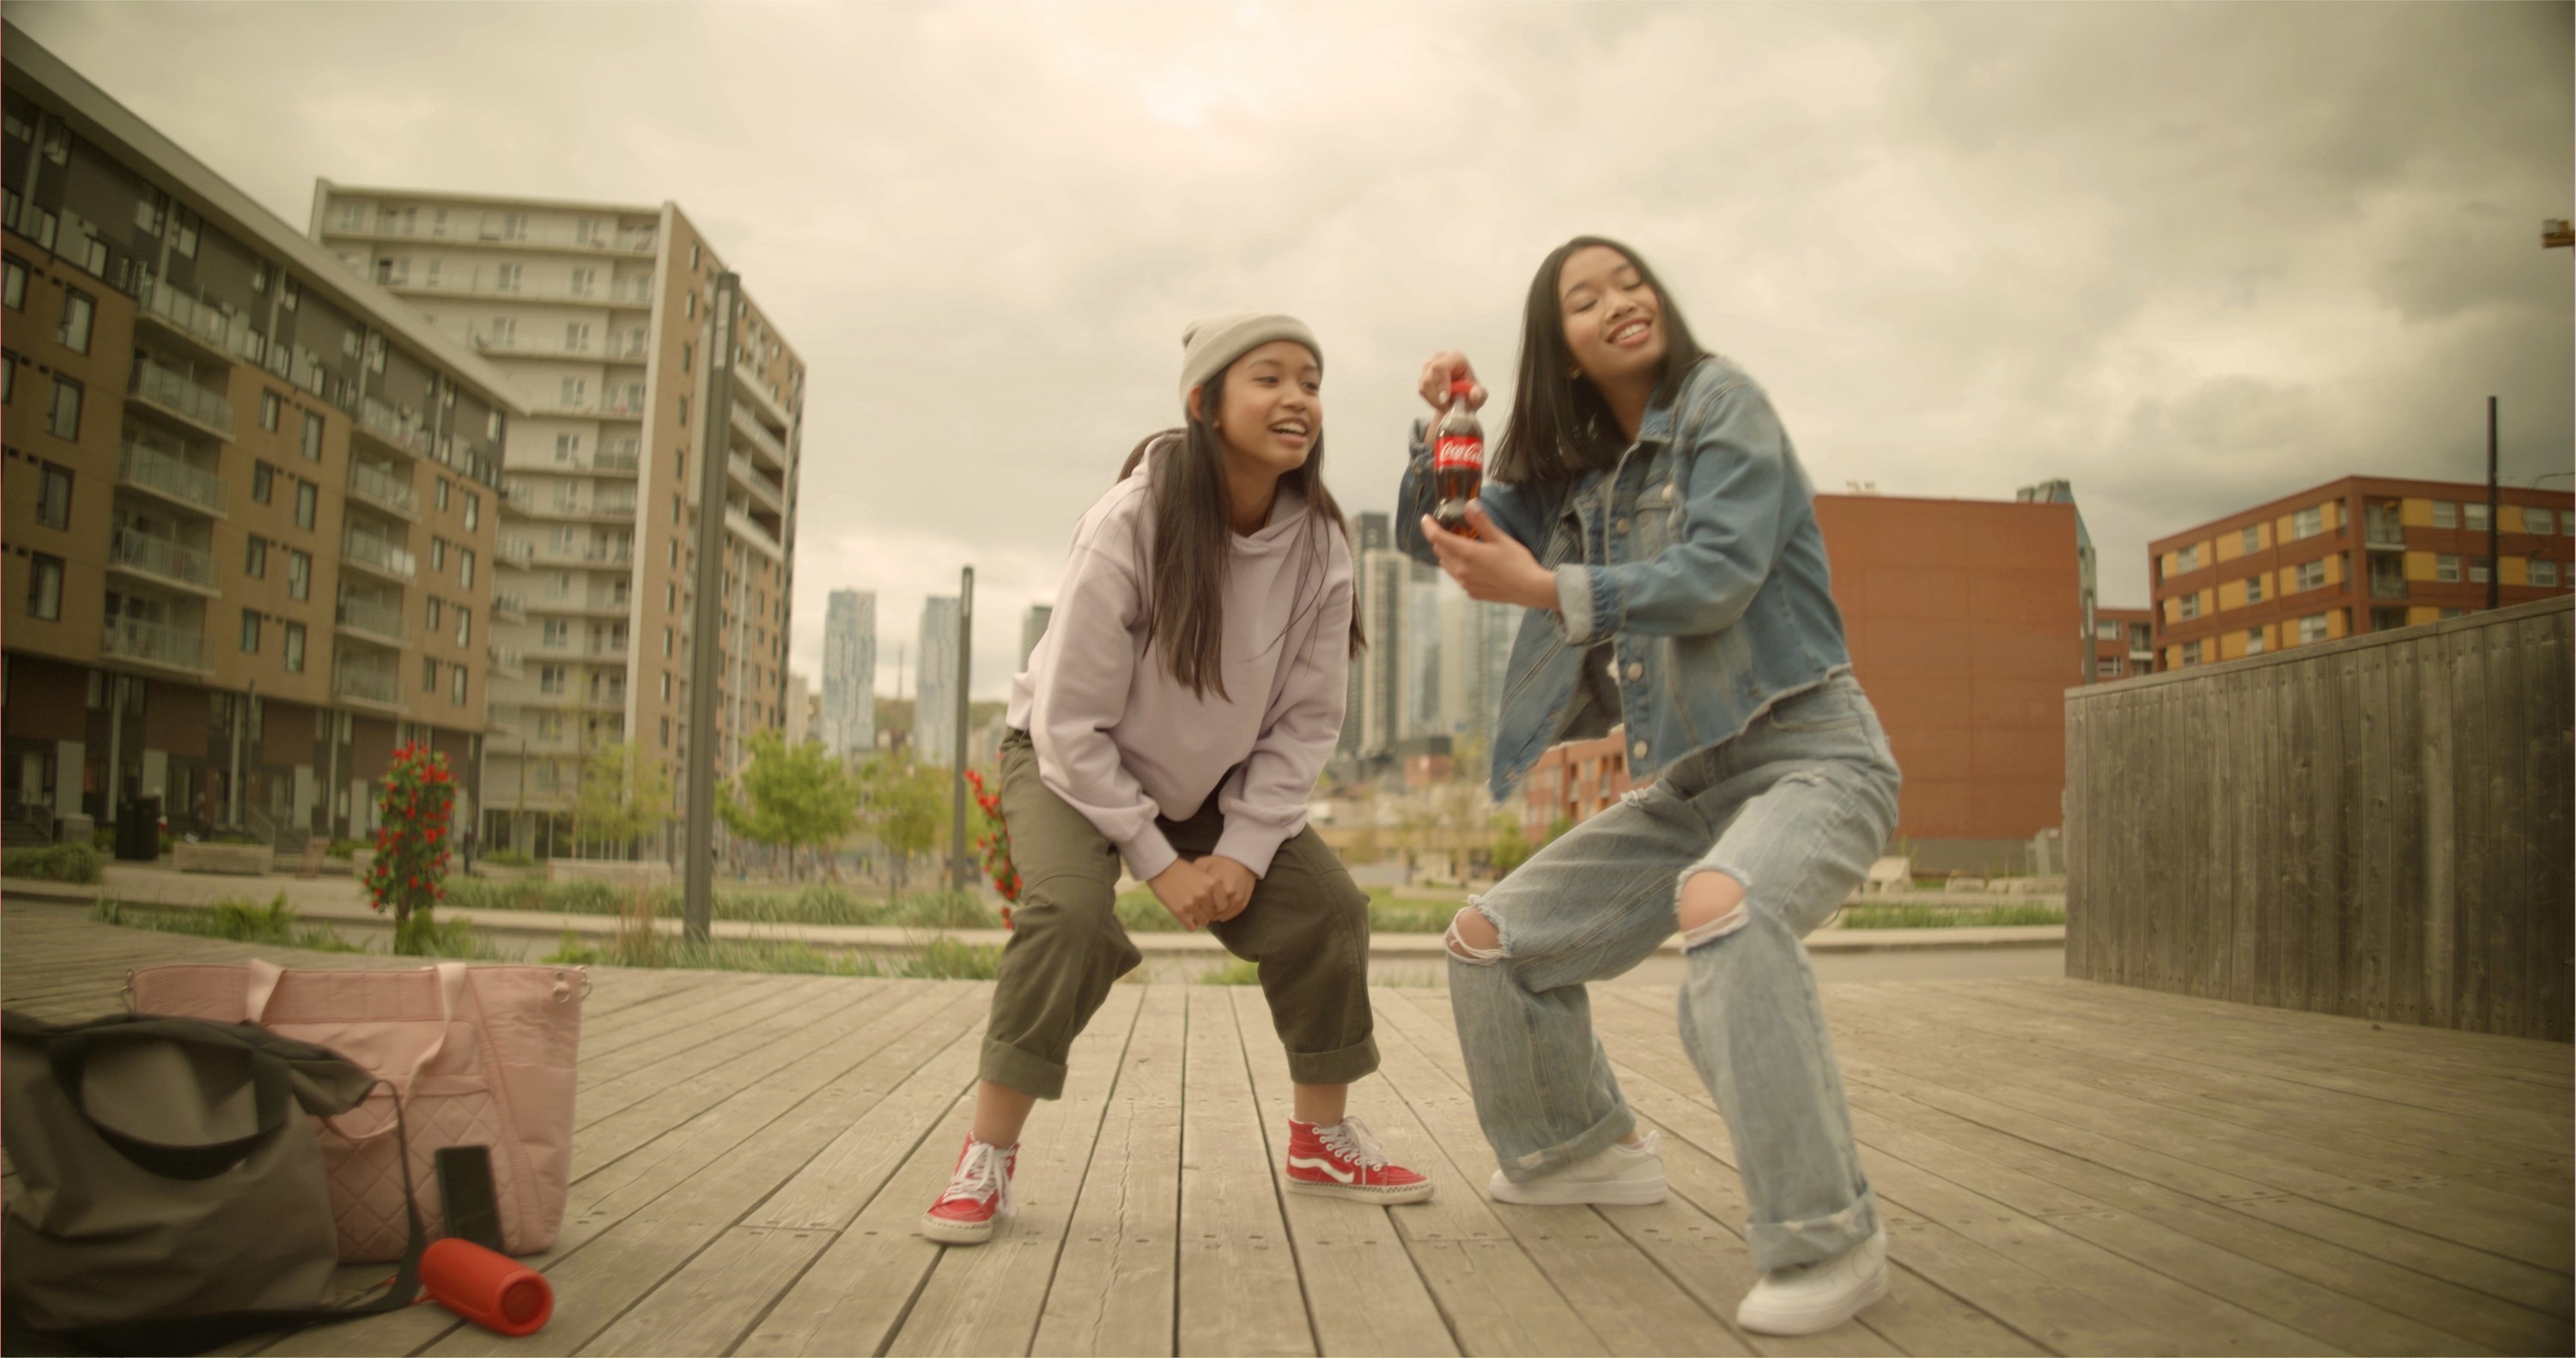 Two young people dancing on a boardwalk while holding Coca-Cola mini bottles